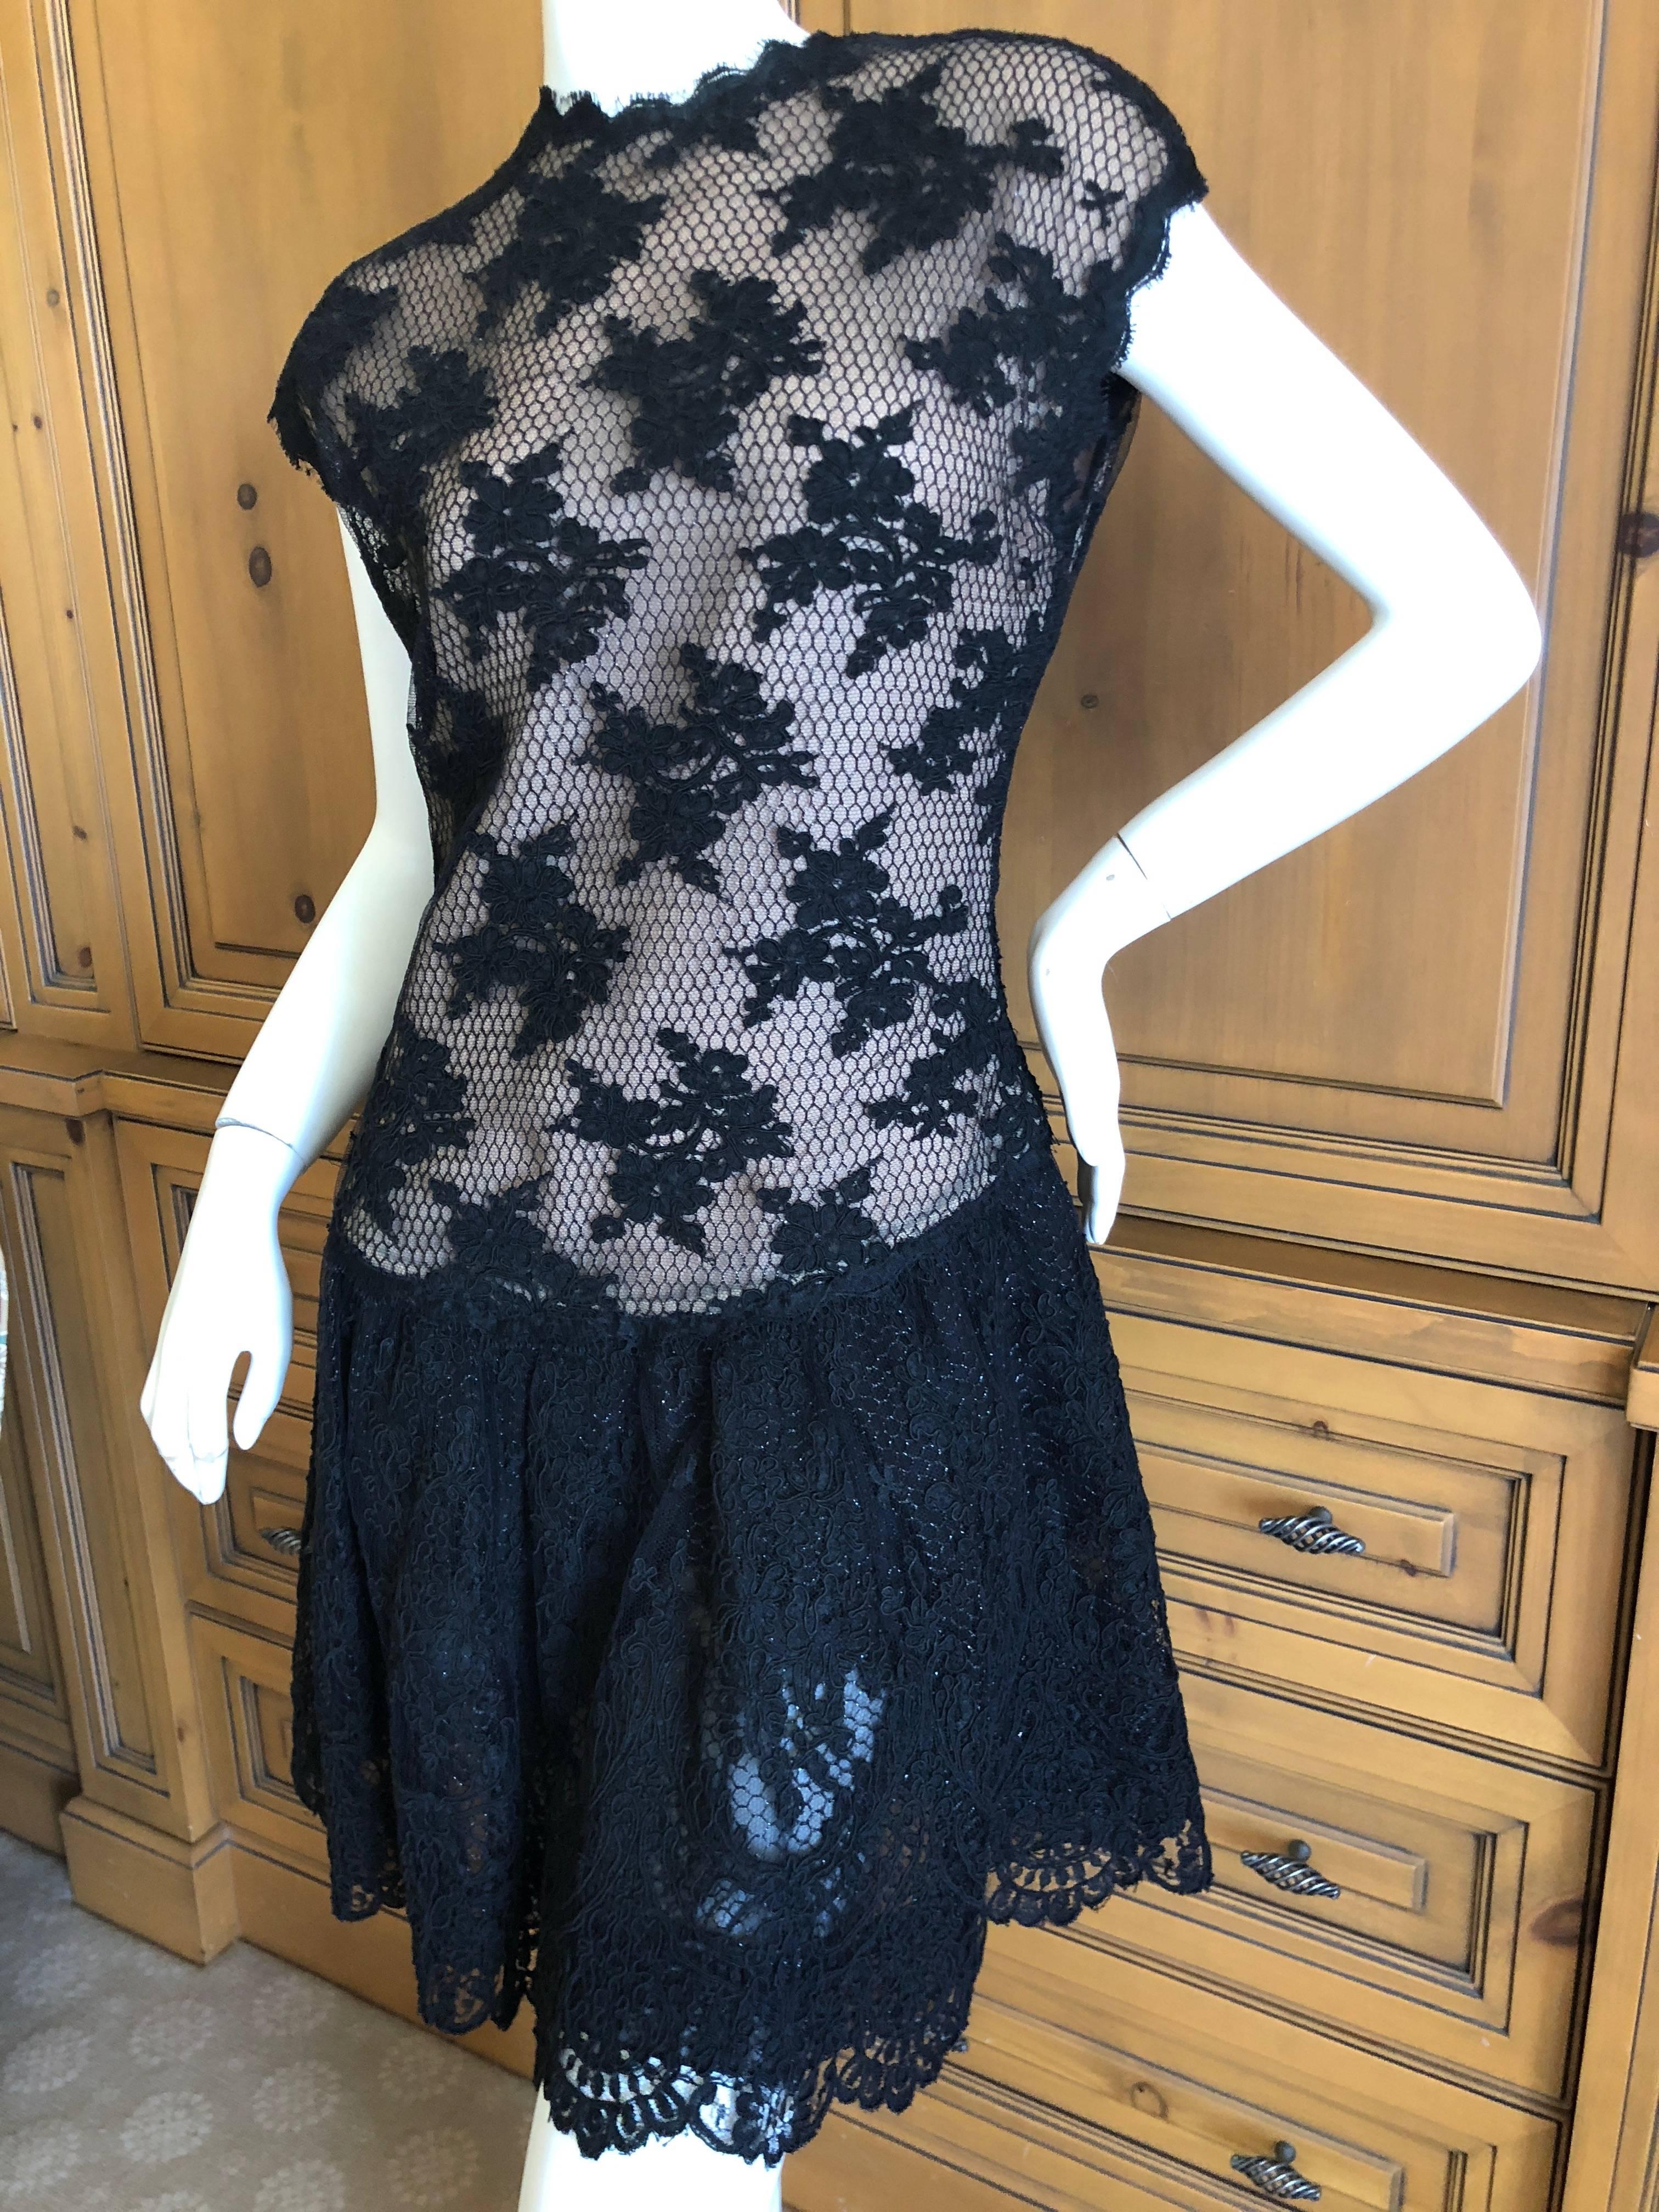 Black Geoffrey Beene Vintage Metallic Accented Lace Dress with Scallop Edges For Sale